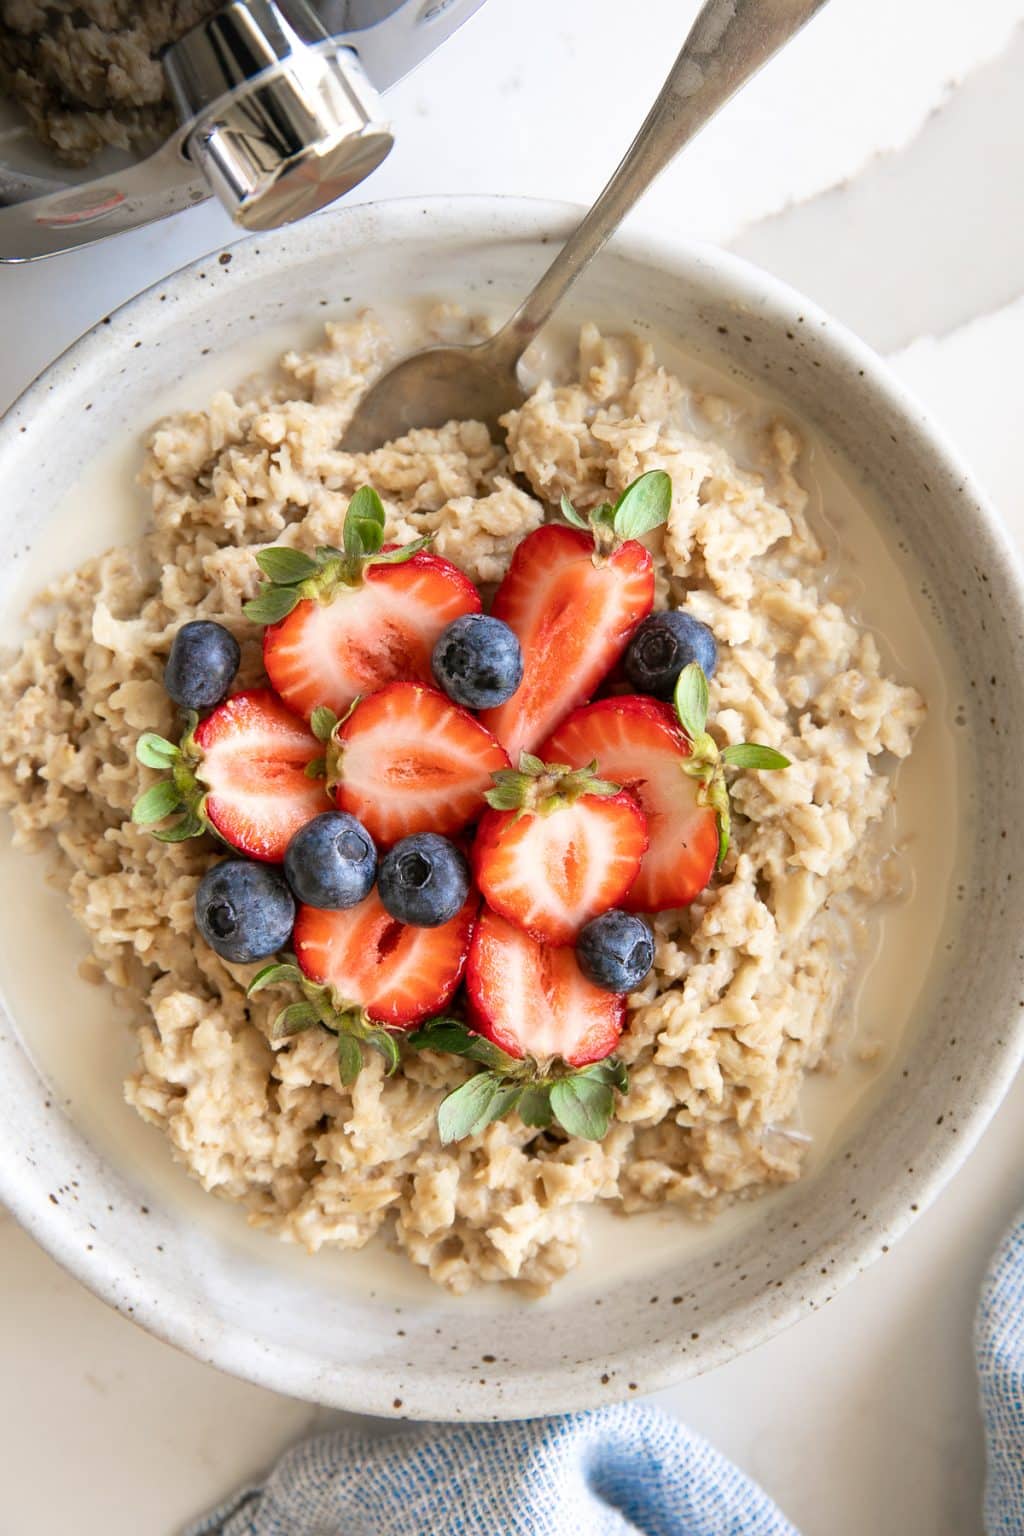 Instant Pot Oatmeal - The Forked Spoon